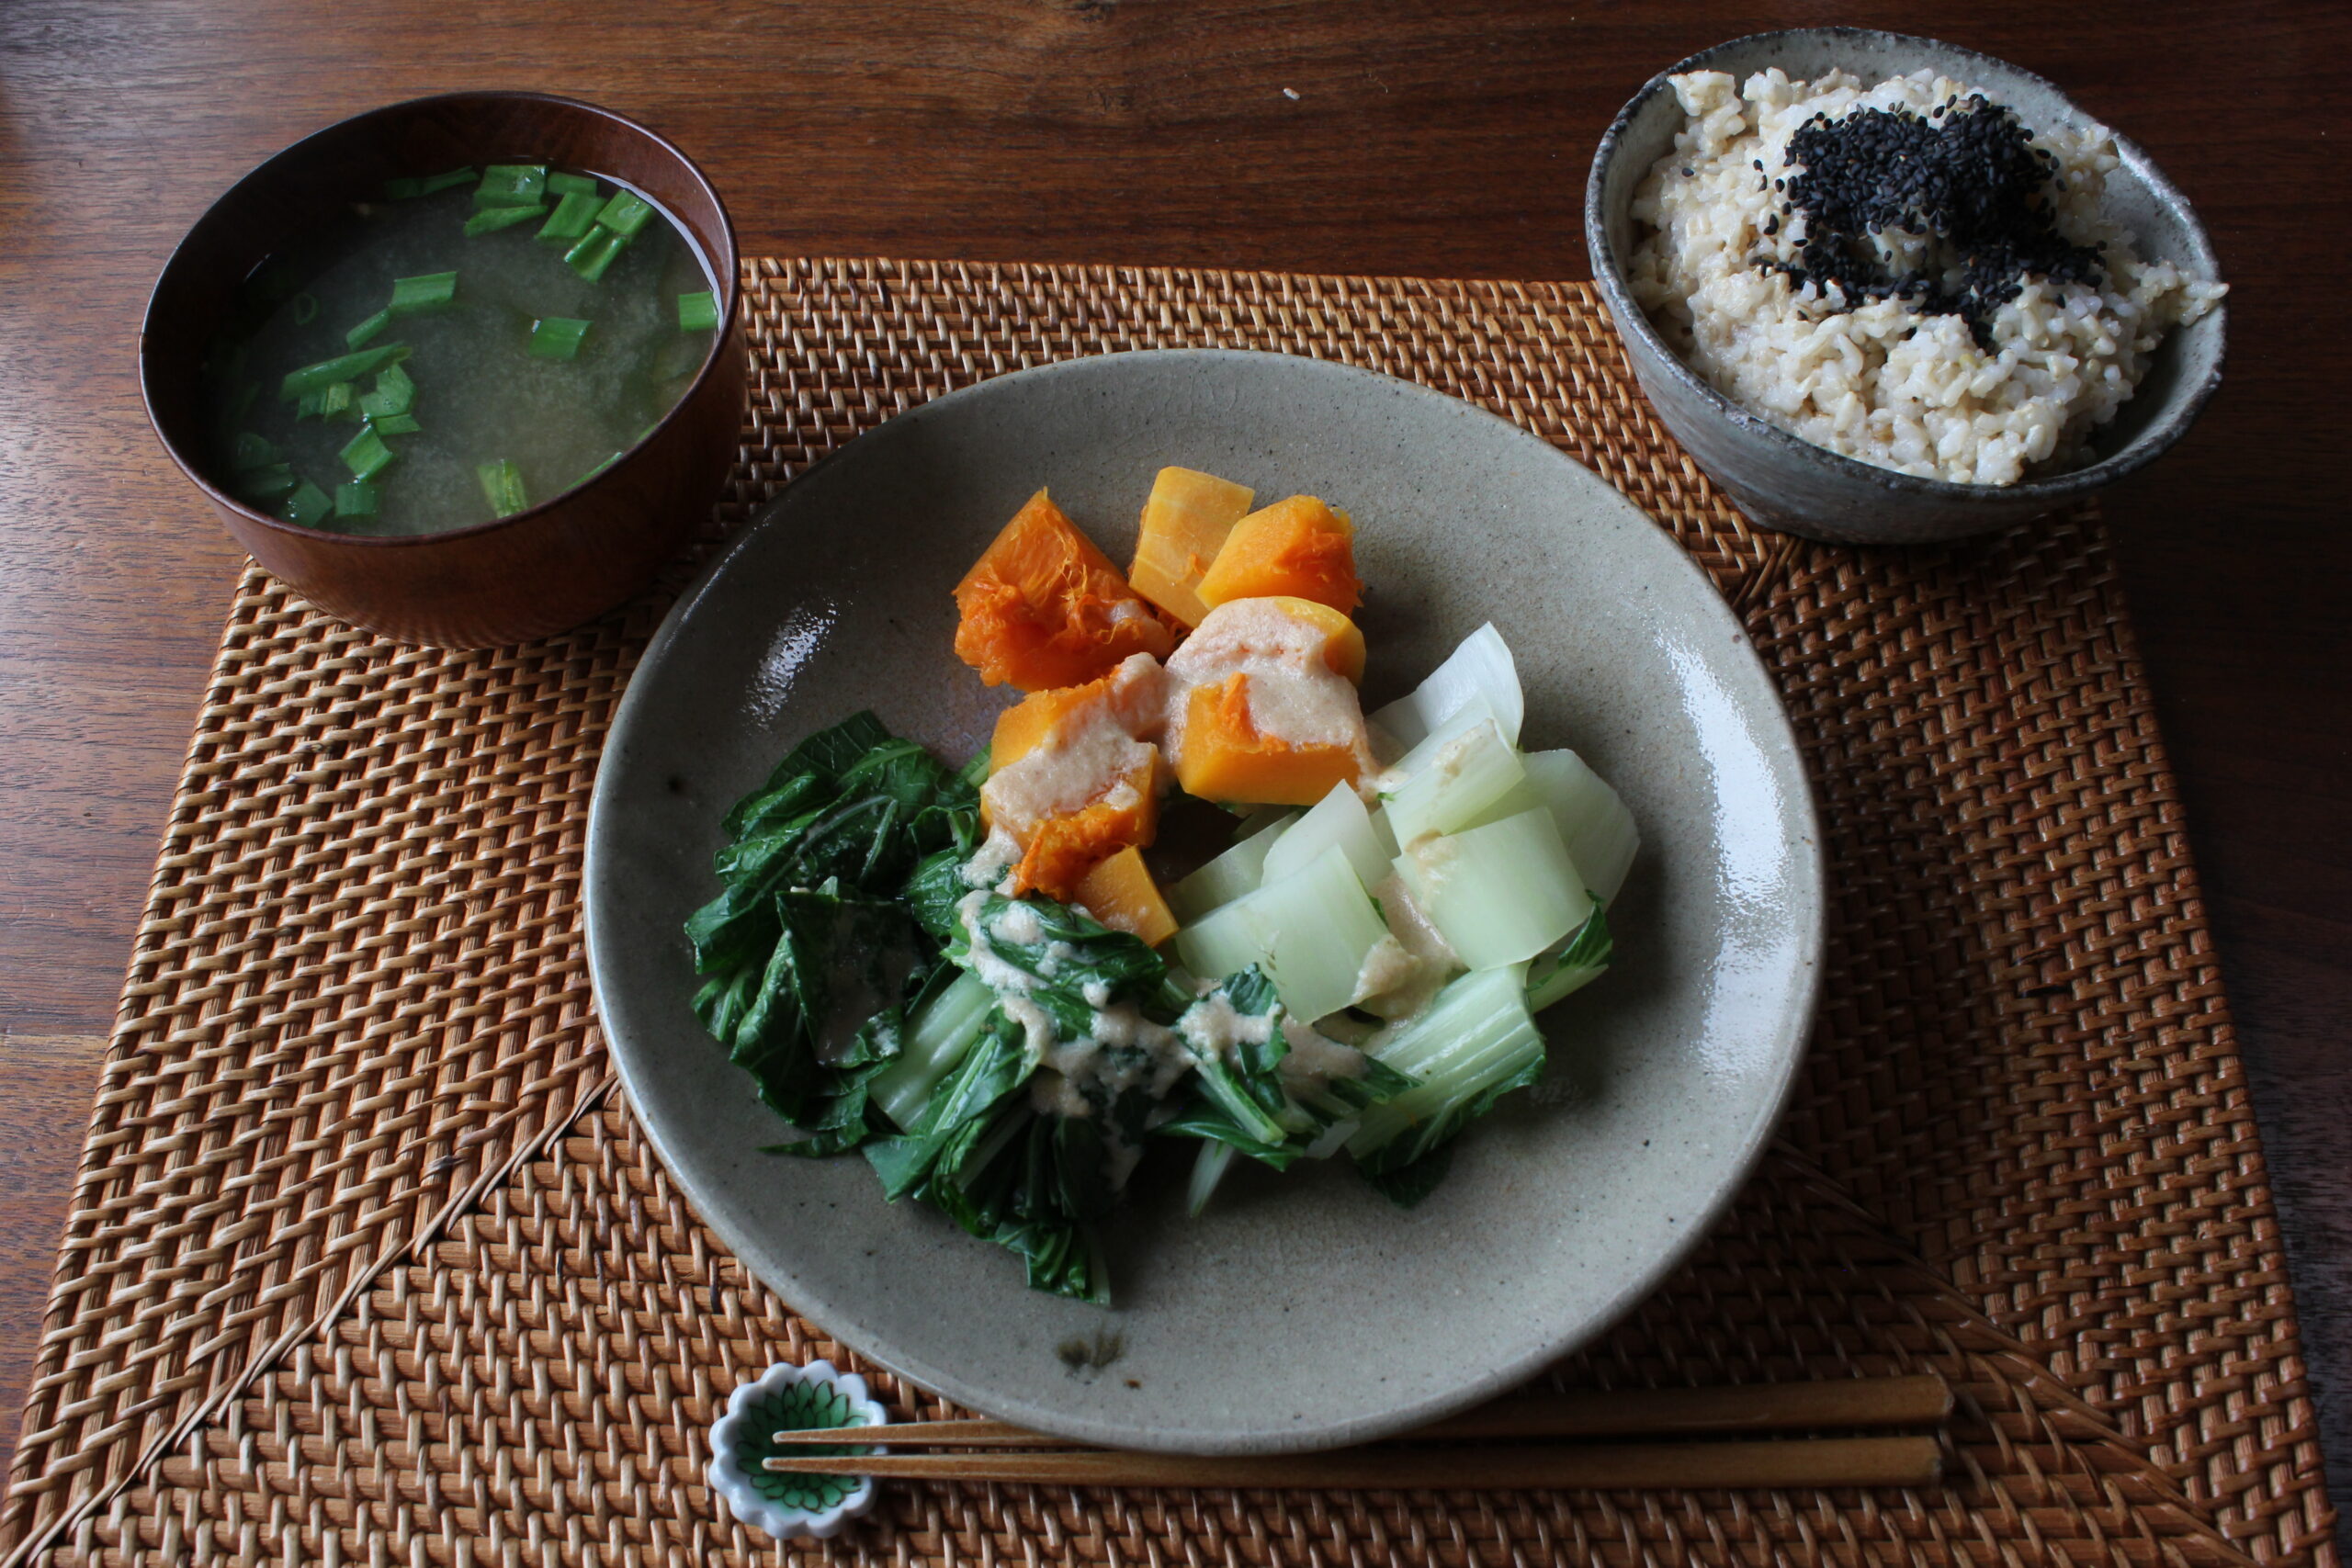 Moon Time Lunch-Steamed vegetables, brown rice, and herbal broth miso soup